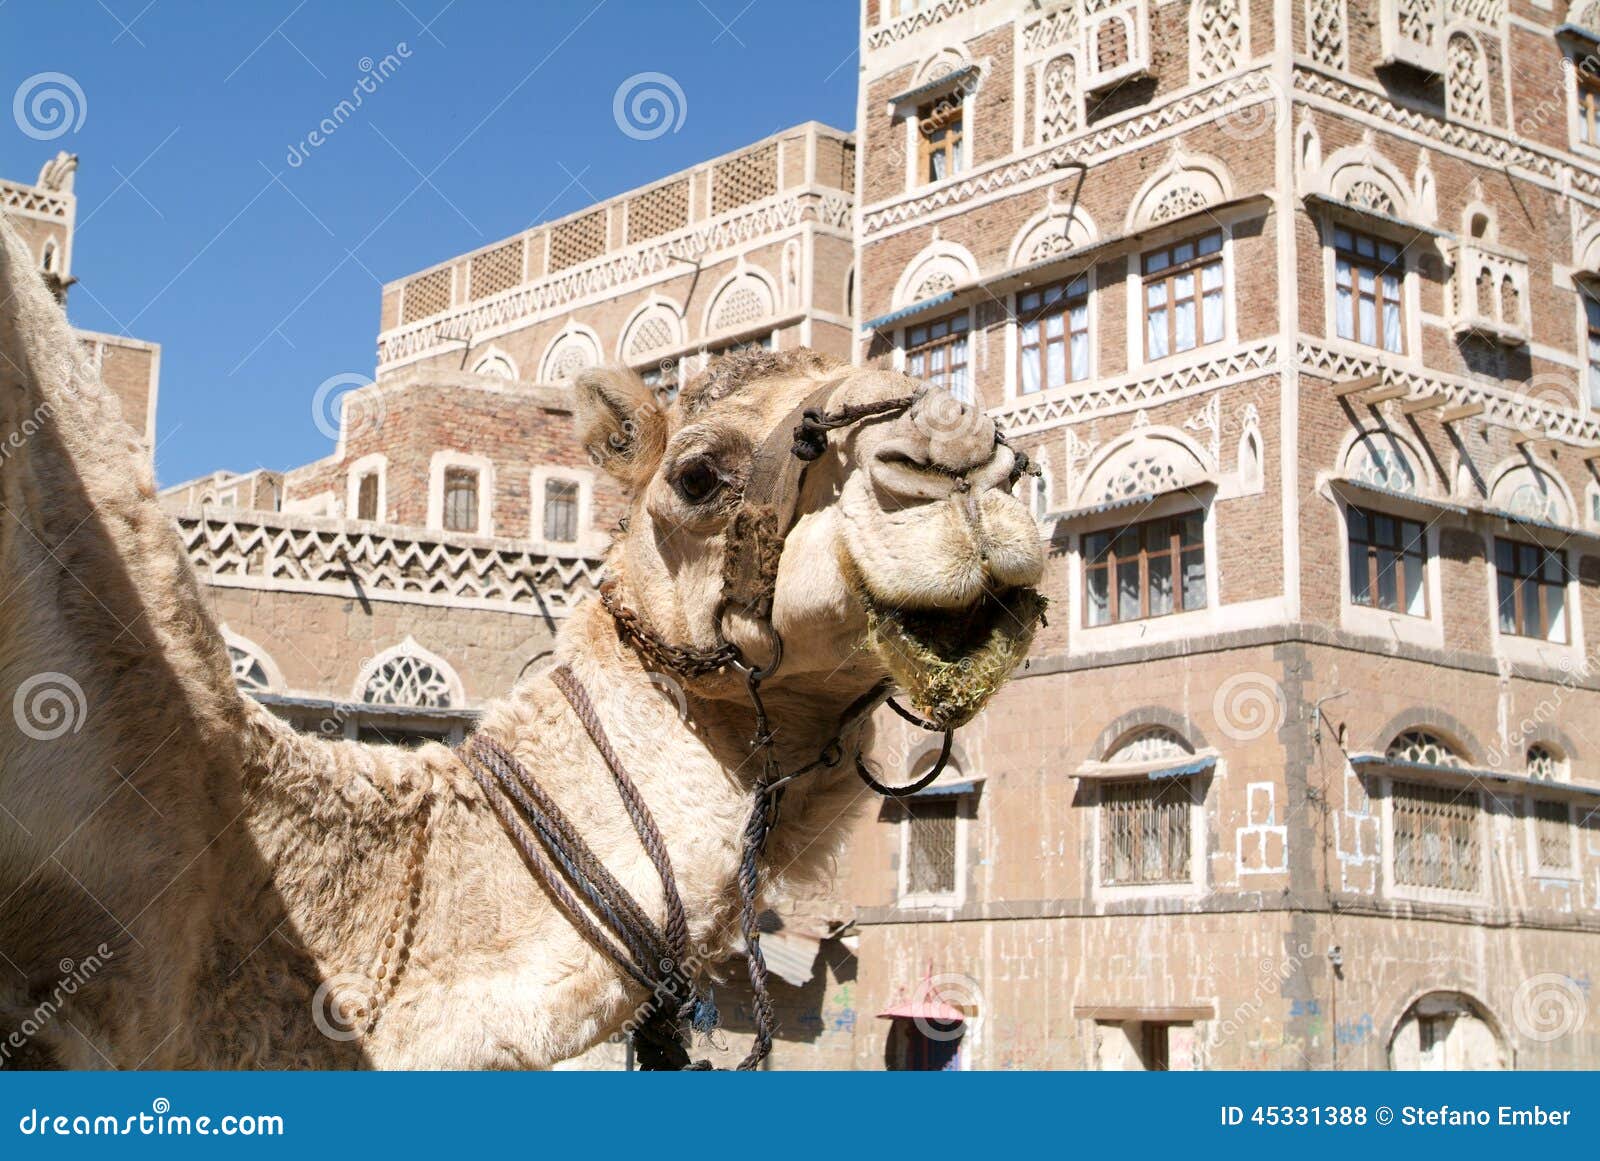 camel in front of the decorated houses of old sana